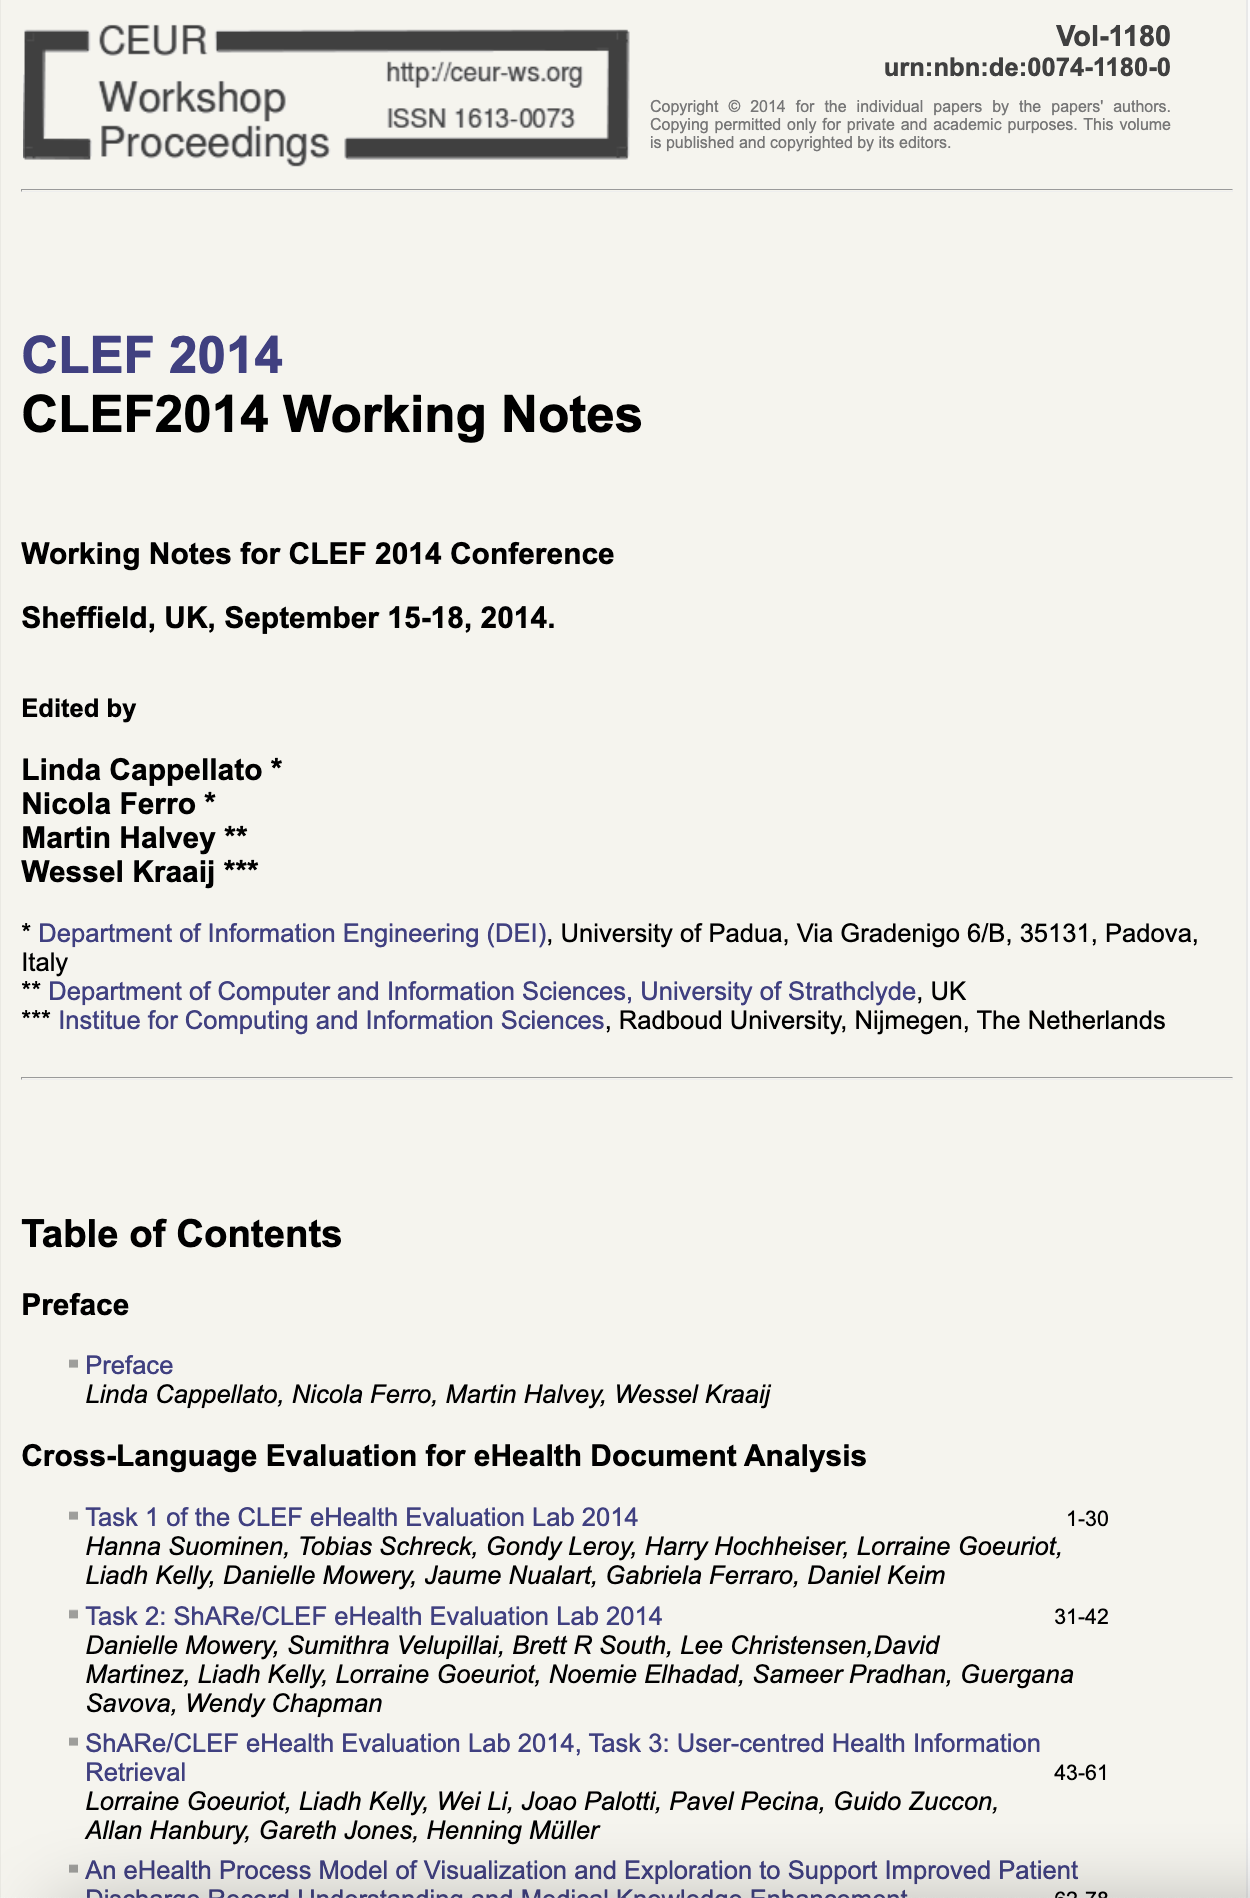 CLEF 2014 CEUR-WS Working Notes page